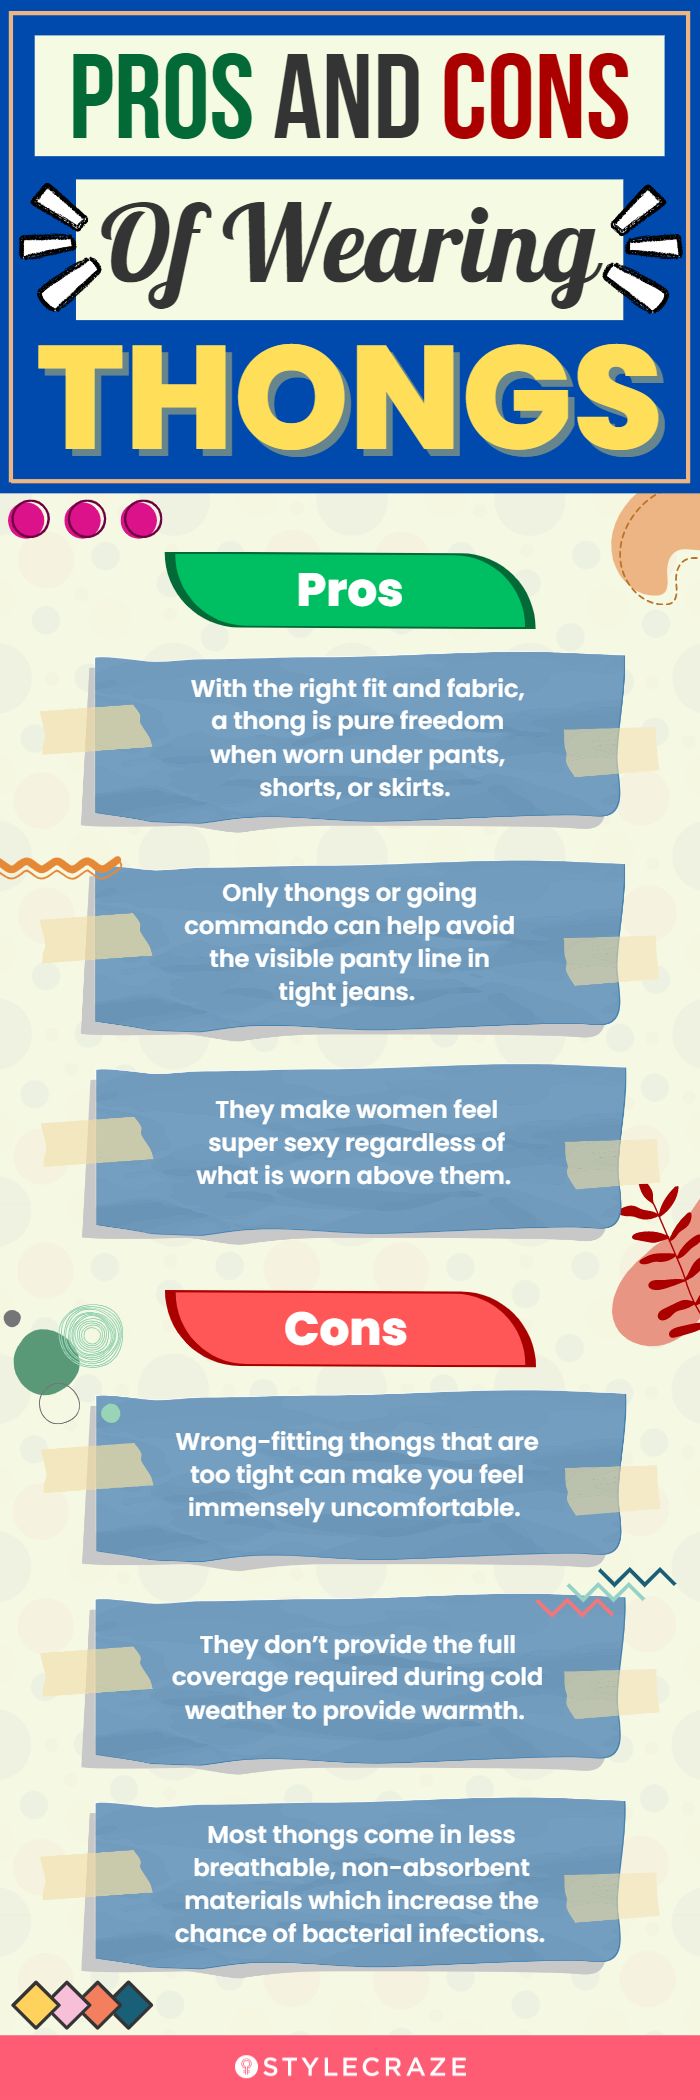 Pros And Cons Of Wearing Thongs (infographic)